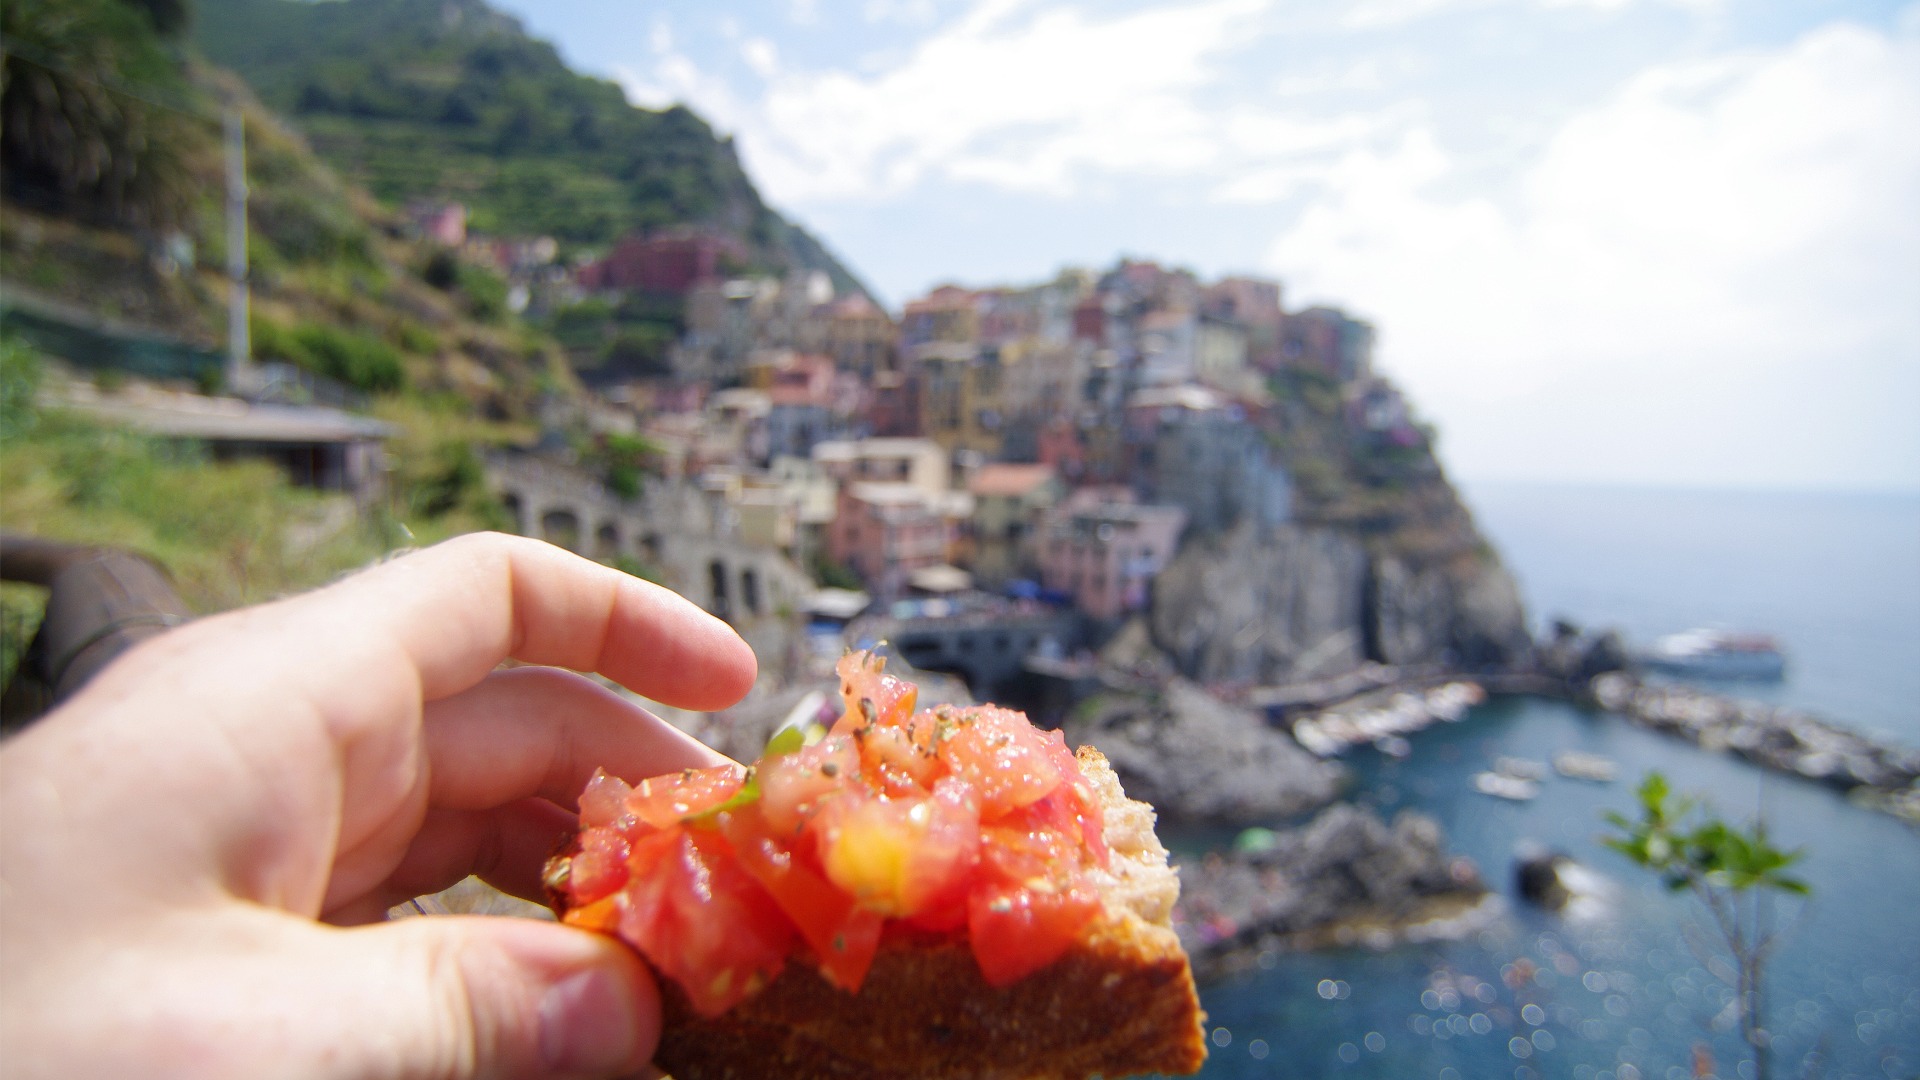 A hand holding a bruschetta in the foreground with a typically Italian landscape in the background.